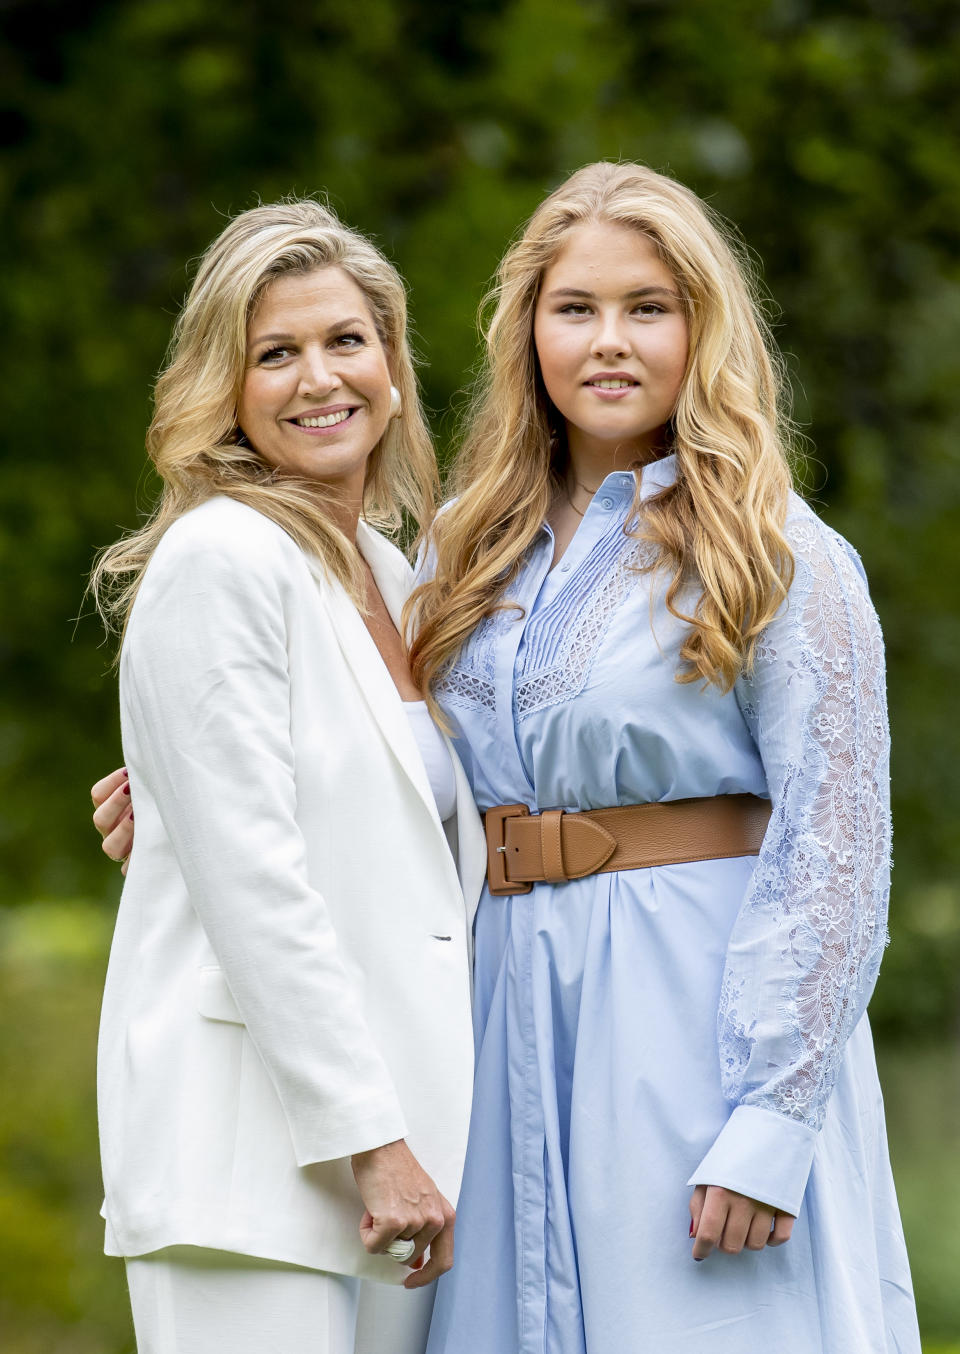 THE HAGUE, NETHERLANDS - JULY 17: Queen Maxima of The Netherlands and Princess Amalia of The Netherlands during the annual summer photocall at their residence Palace Huis ten Bosch on July 17, 2020 in The Hague, Netherlands. (Photo by Patrick van Katwijk/Getty Images)